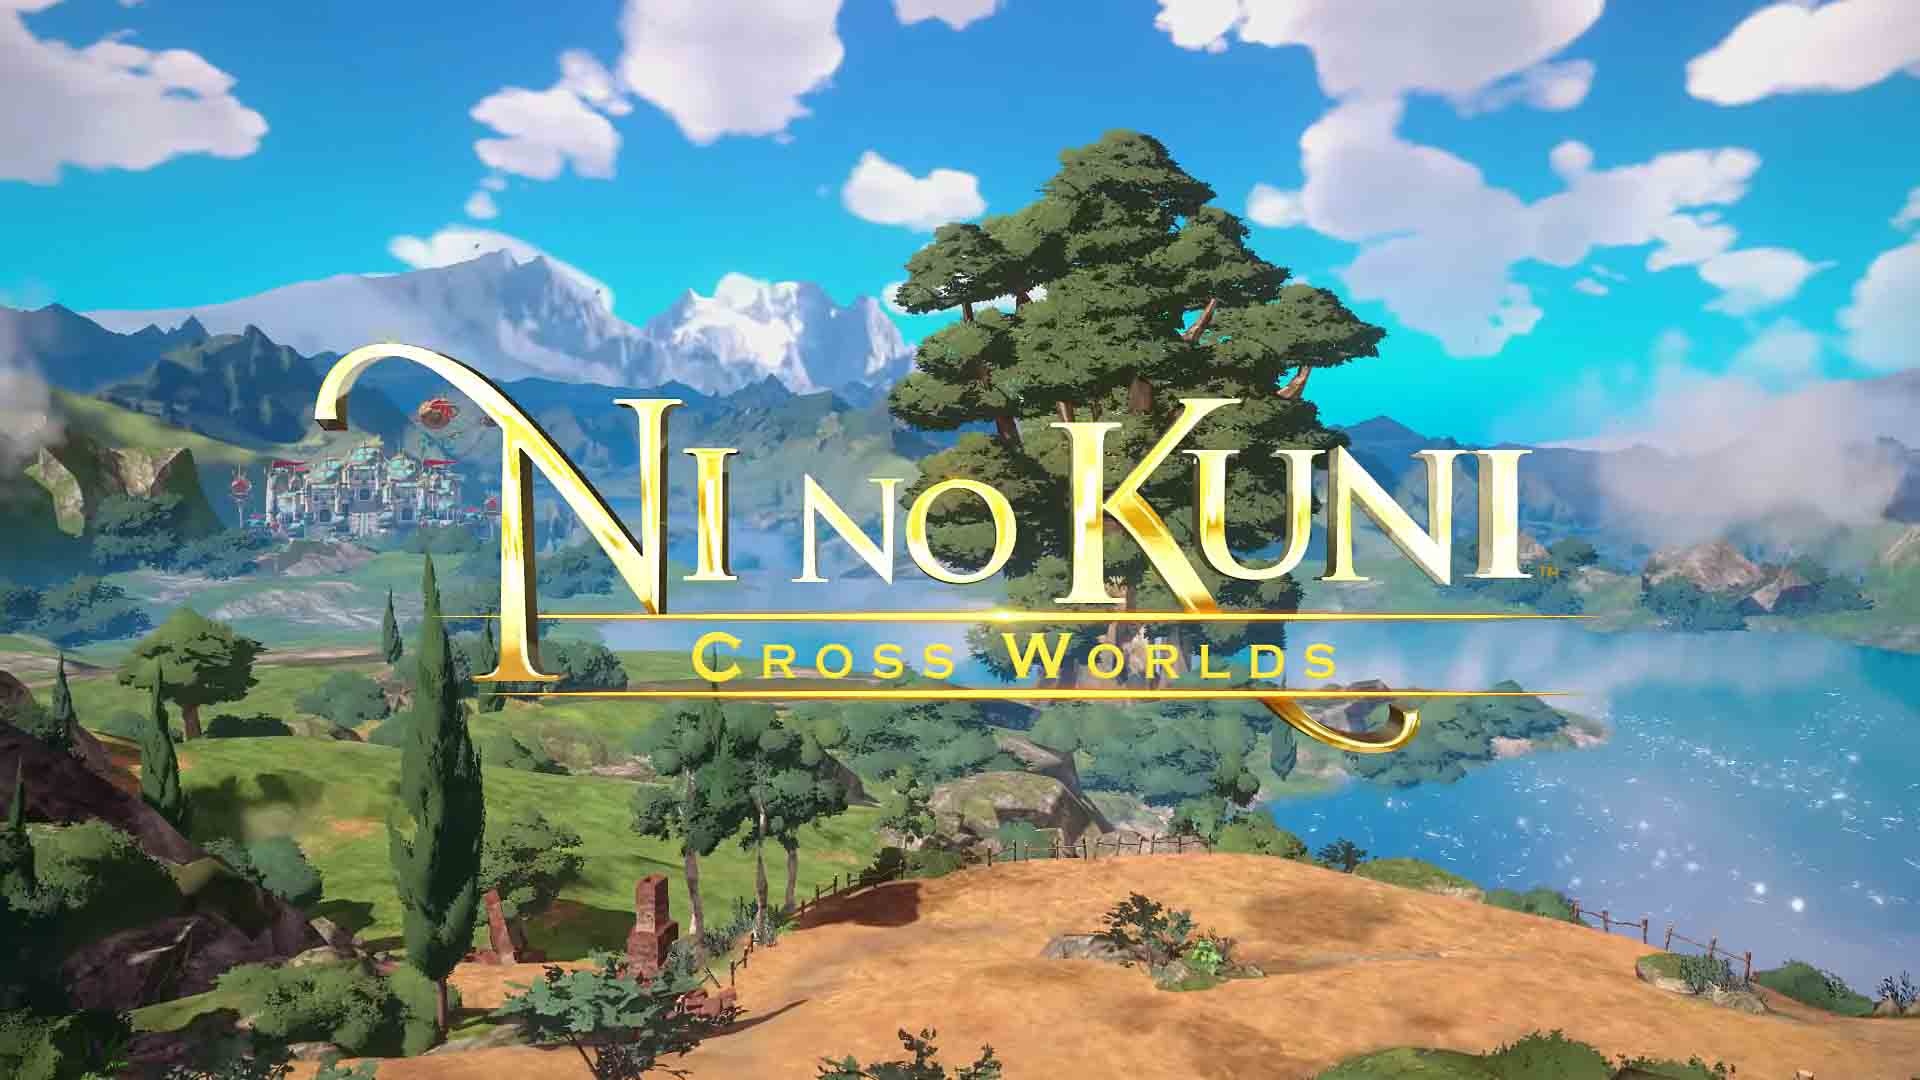 Ni no Kuni: Cross Worlds: The second highest-grossing game globally in that period behind Honor of Kings. 1920x1080 Full HD Background.